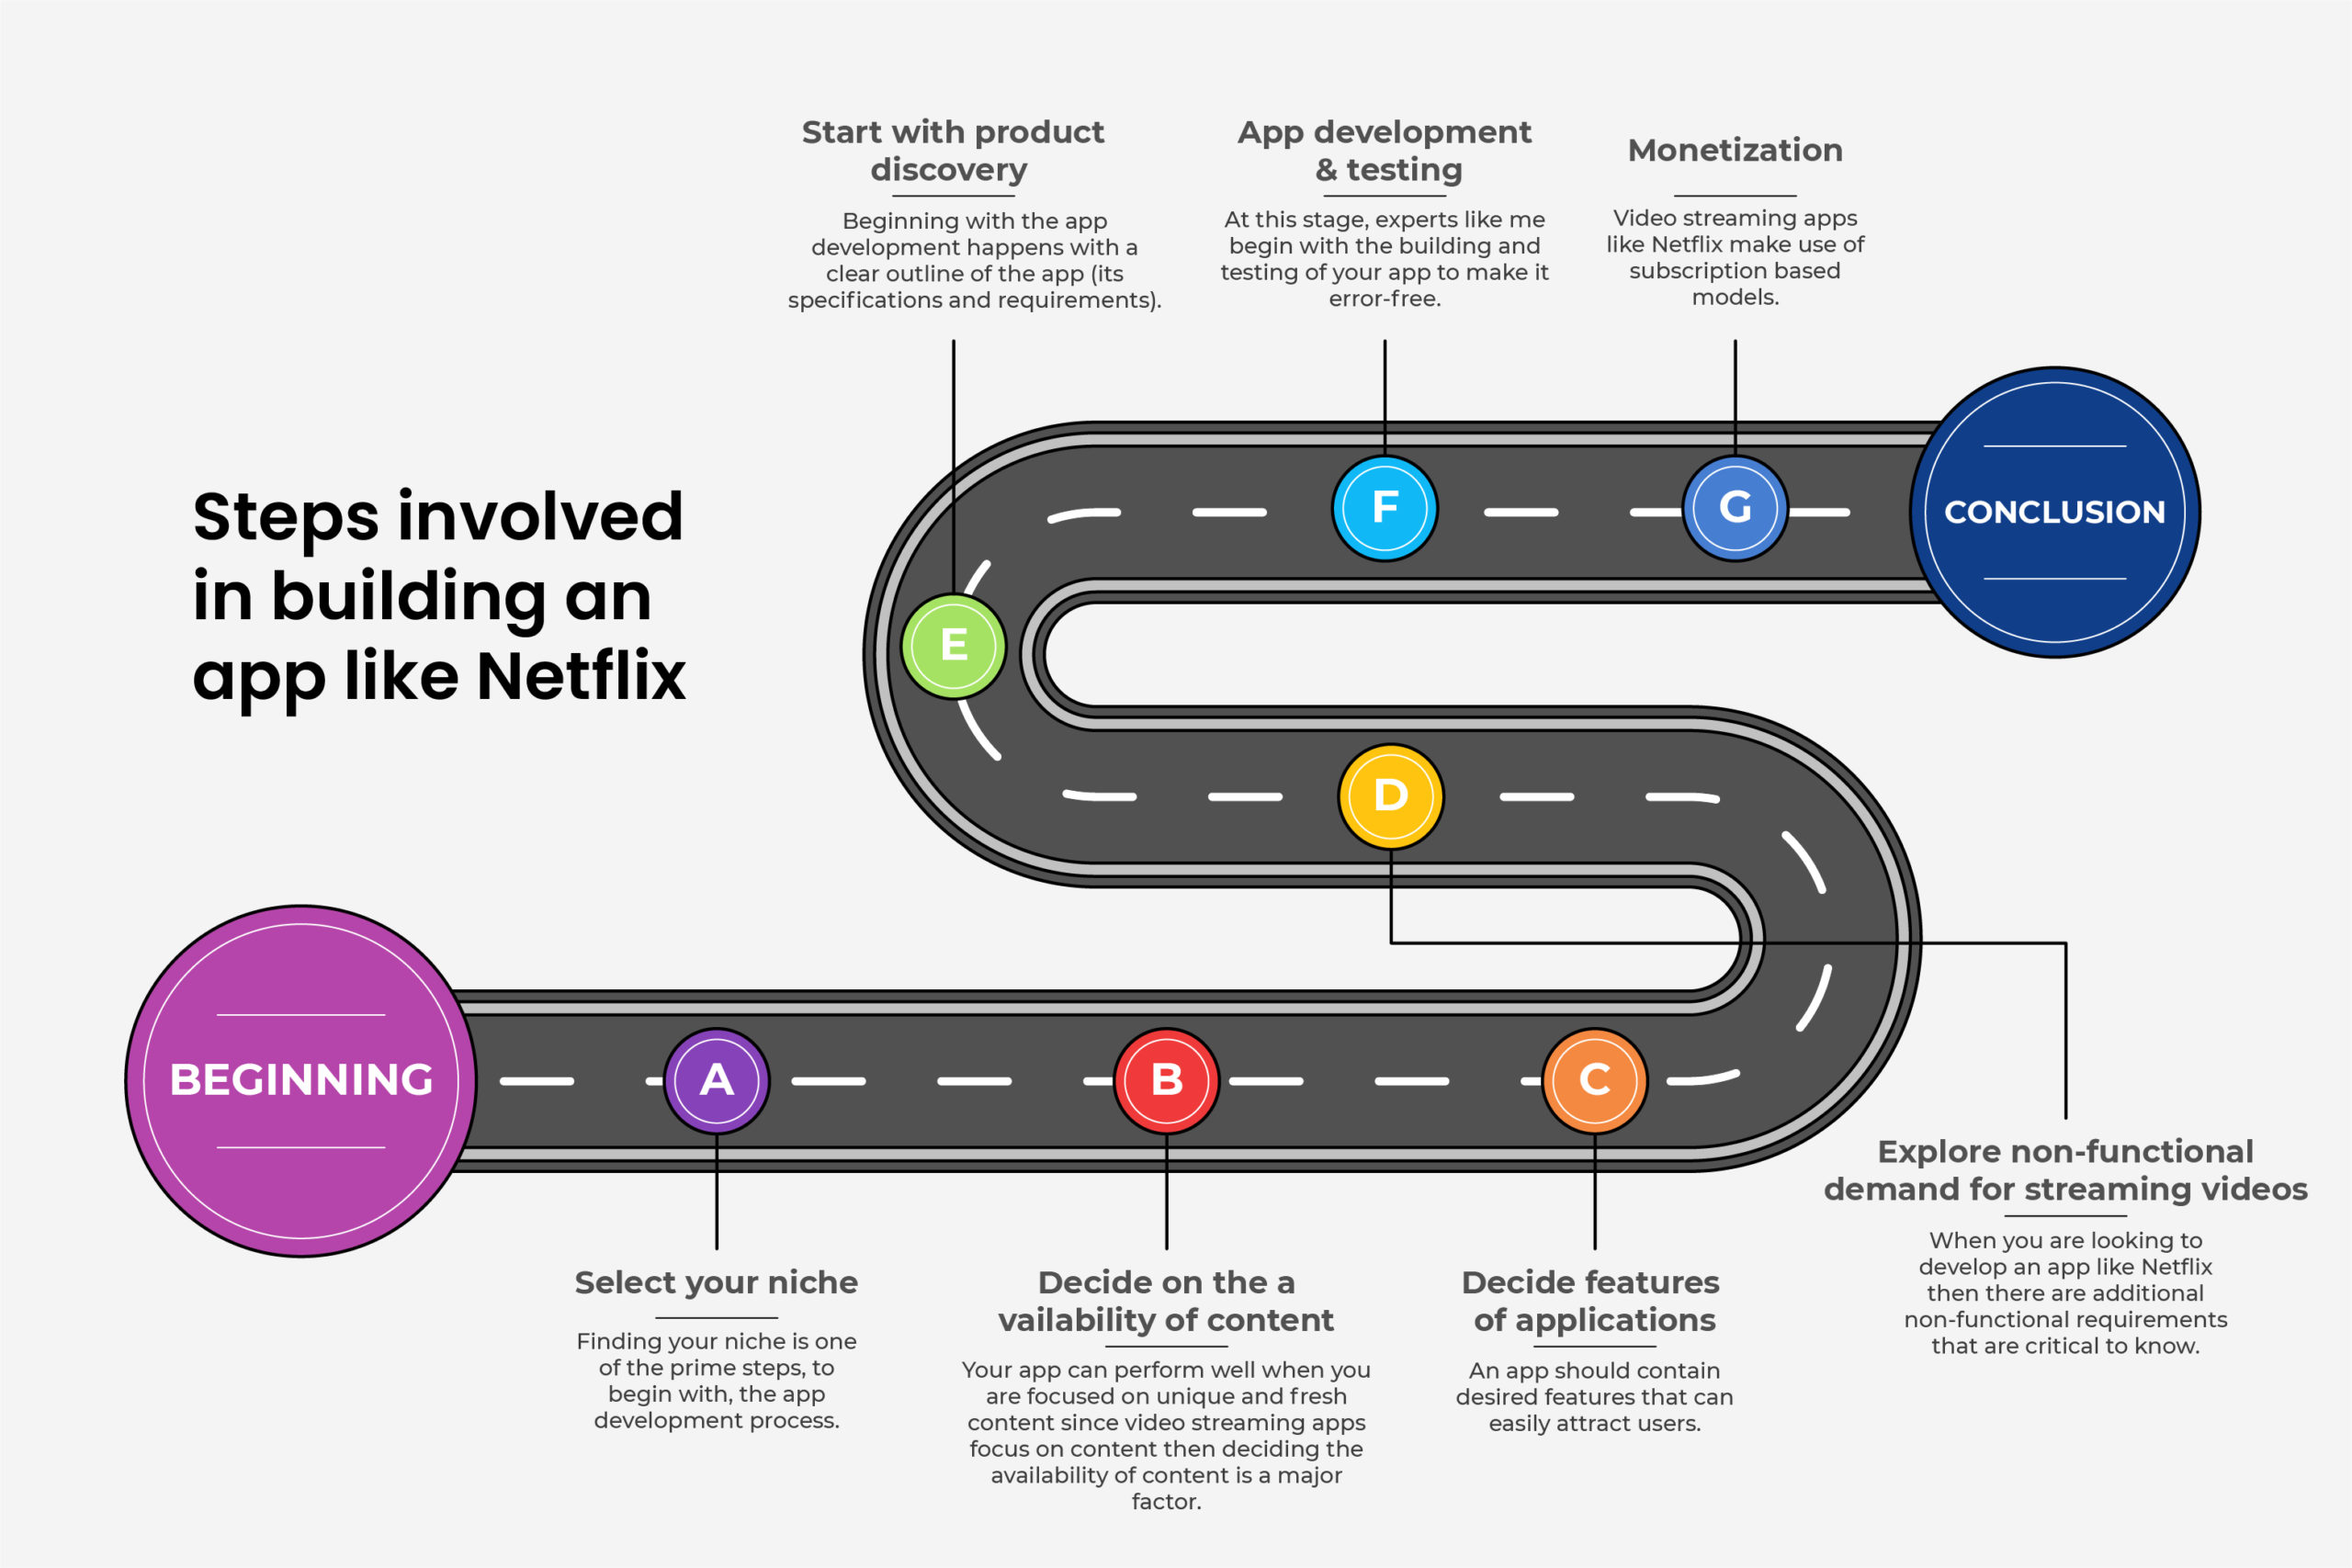 Steps involved in building an app like Netflix